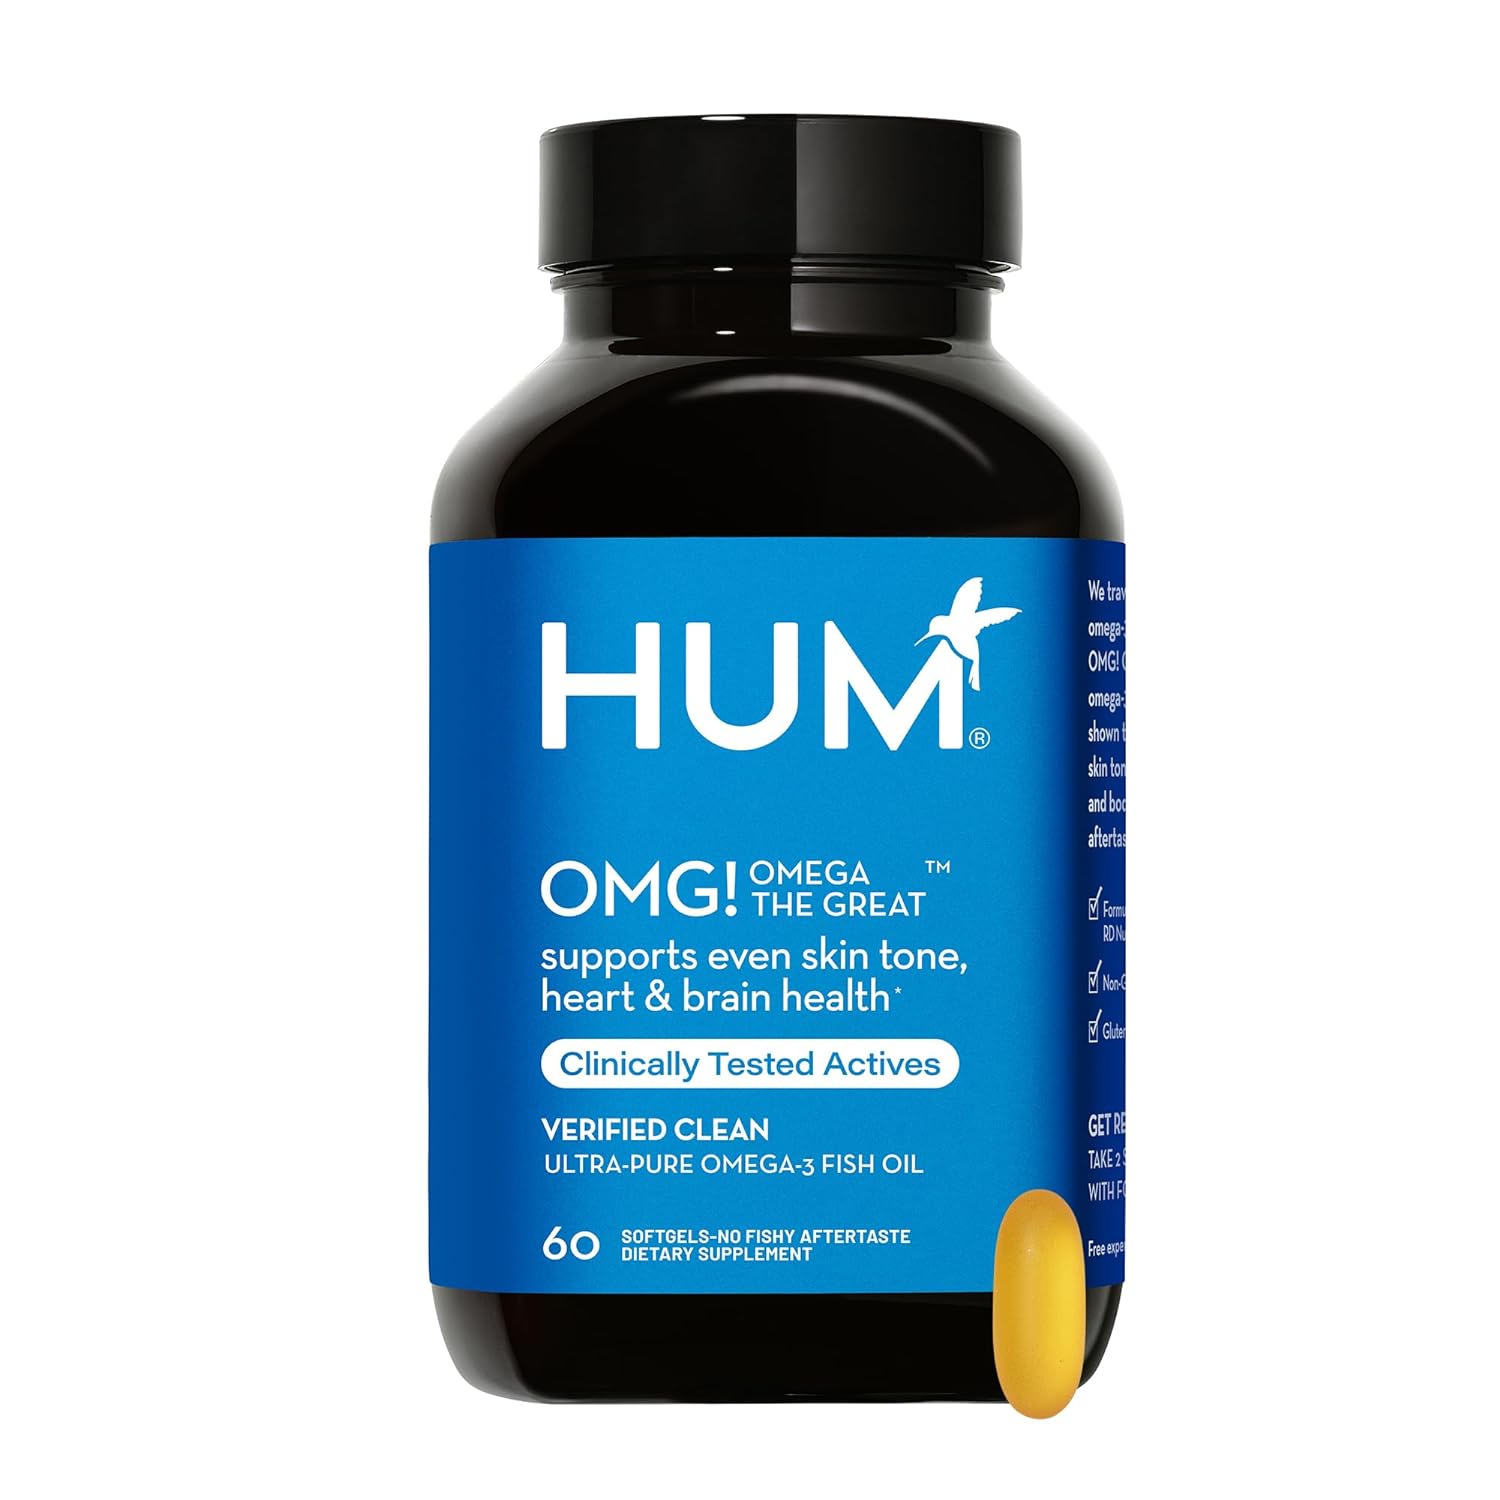 HUM OMG! Omega The Great - Triple Omega 3 Fish Oil Supplement with DHA